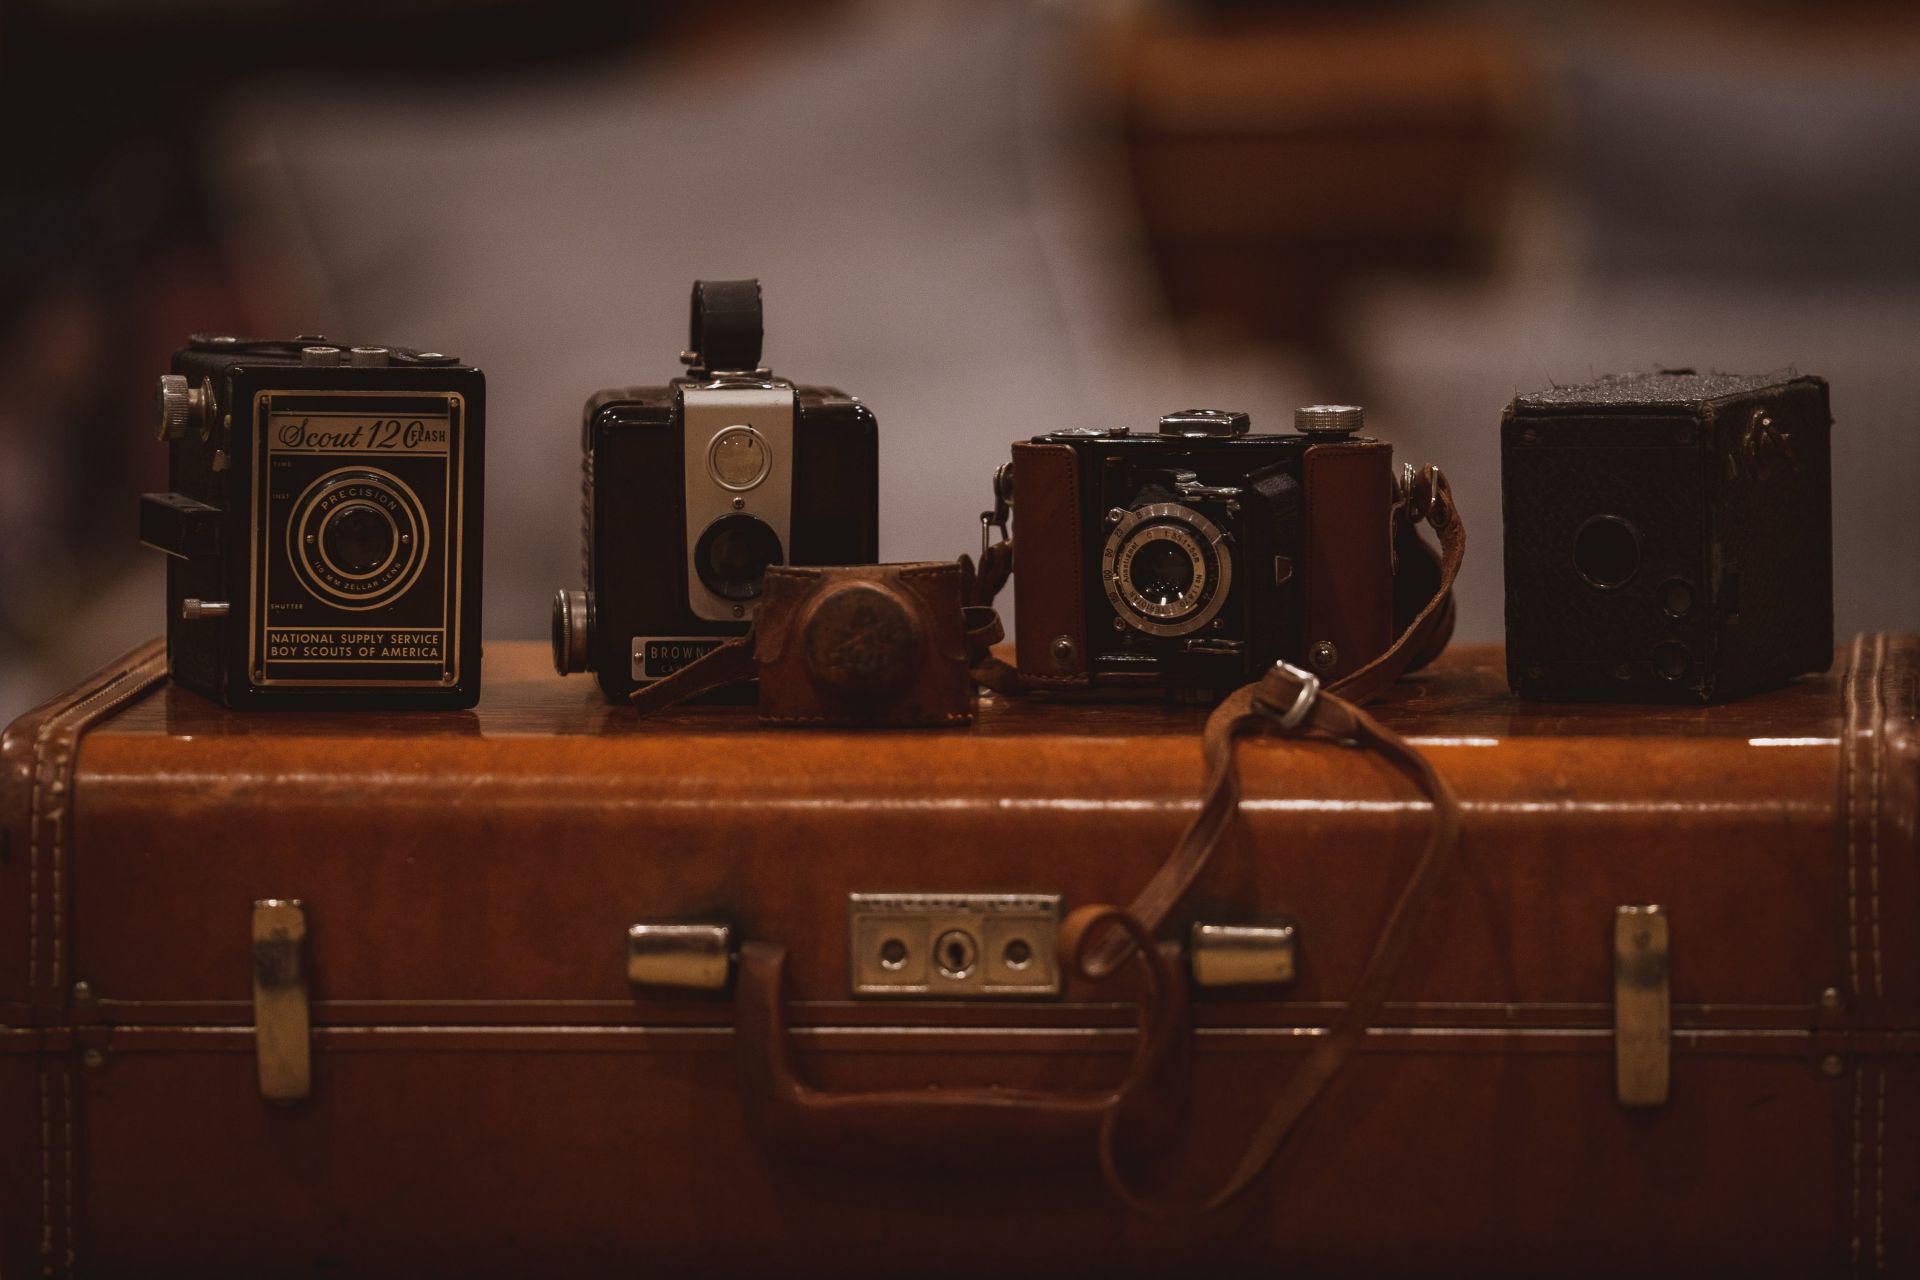 Four Assorted-color Cameras on Brown Suitfcase